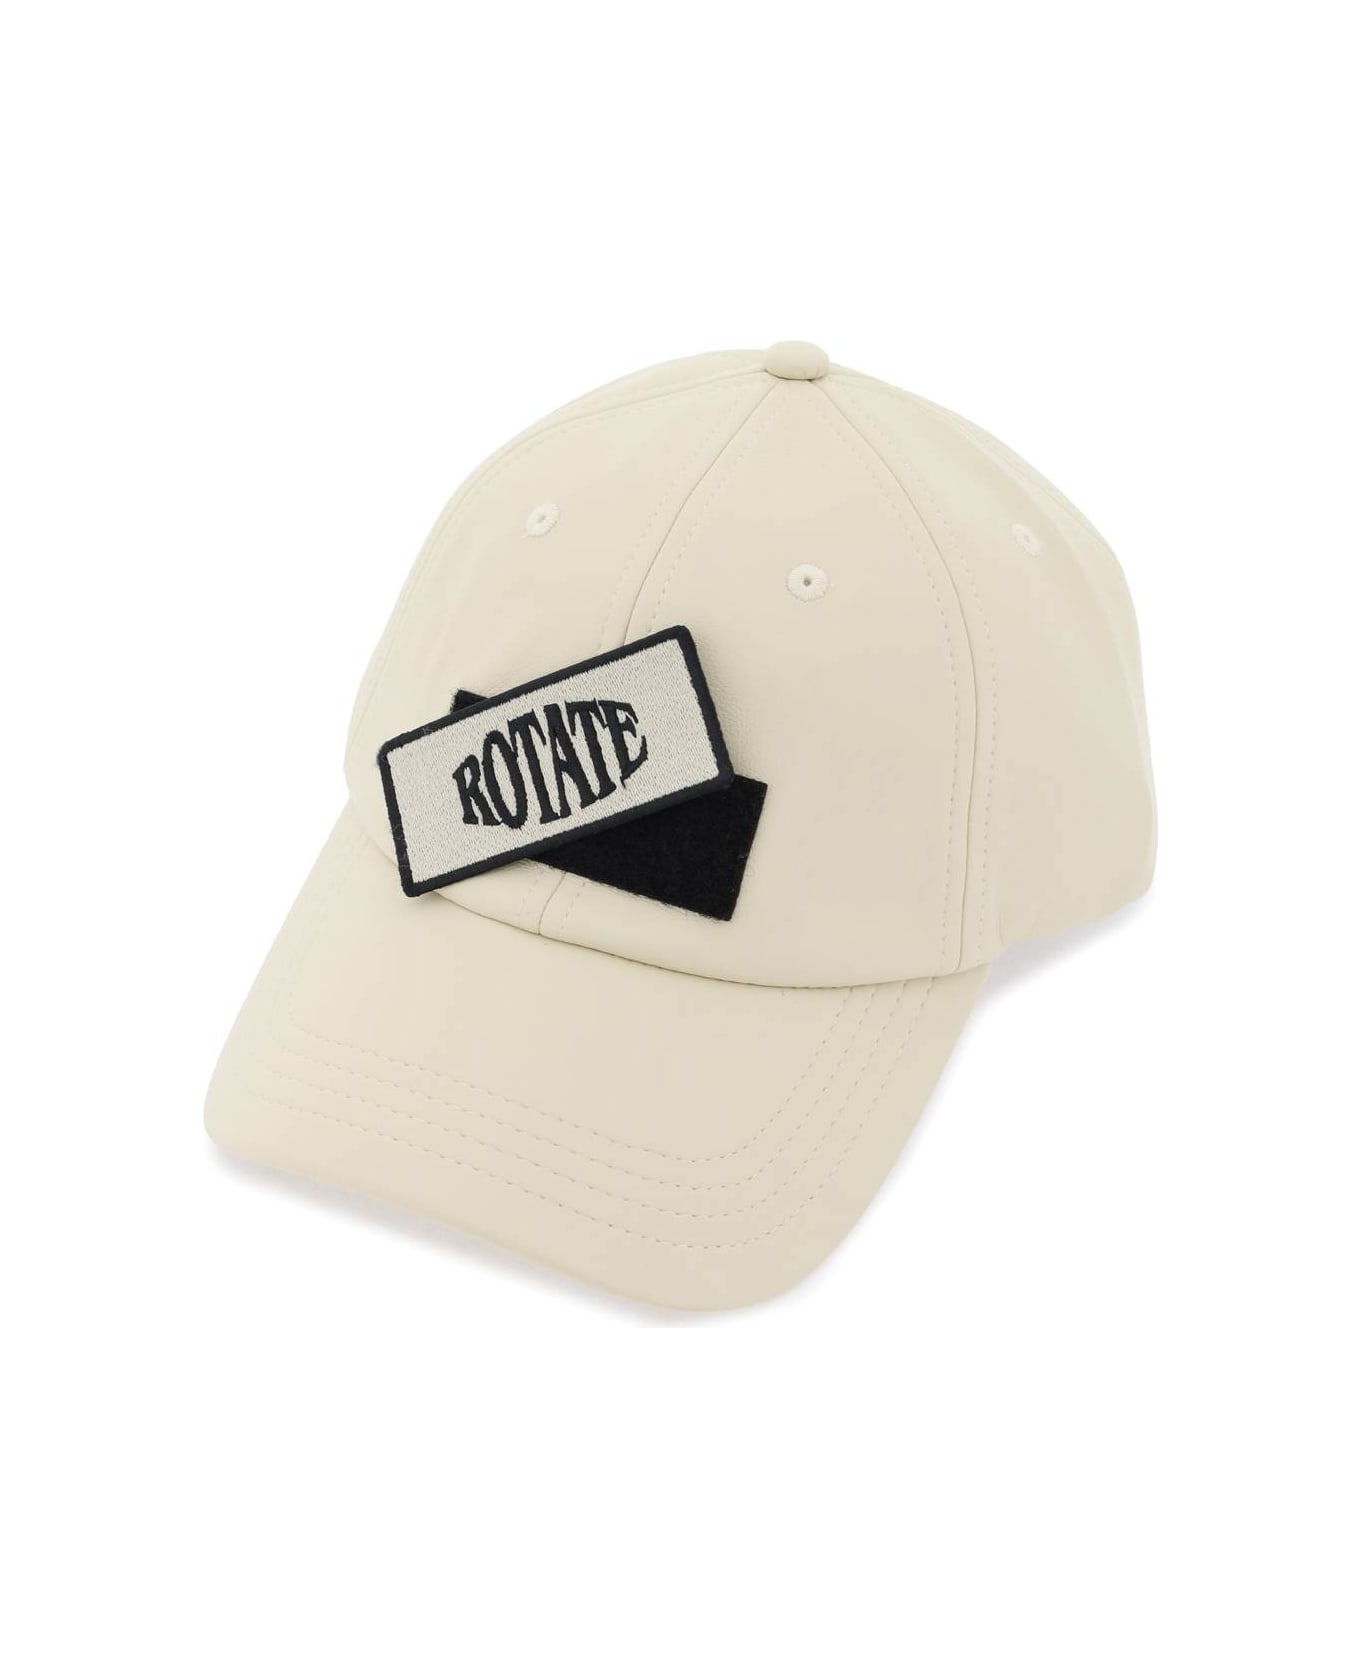 Rotate by Birger Christensen Baseball Cap With Logo Patch - OYSTER GRAY (Beige)